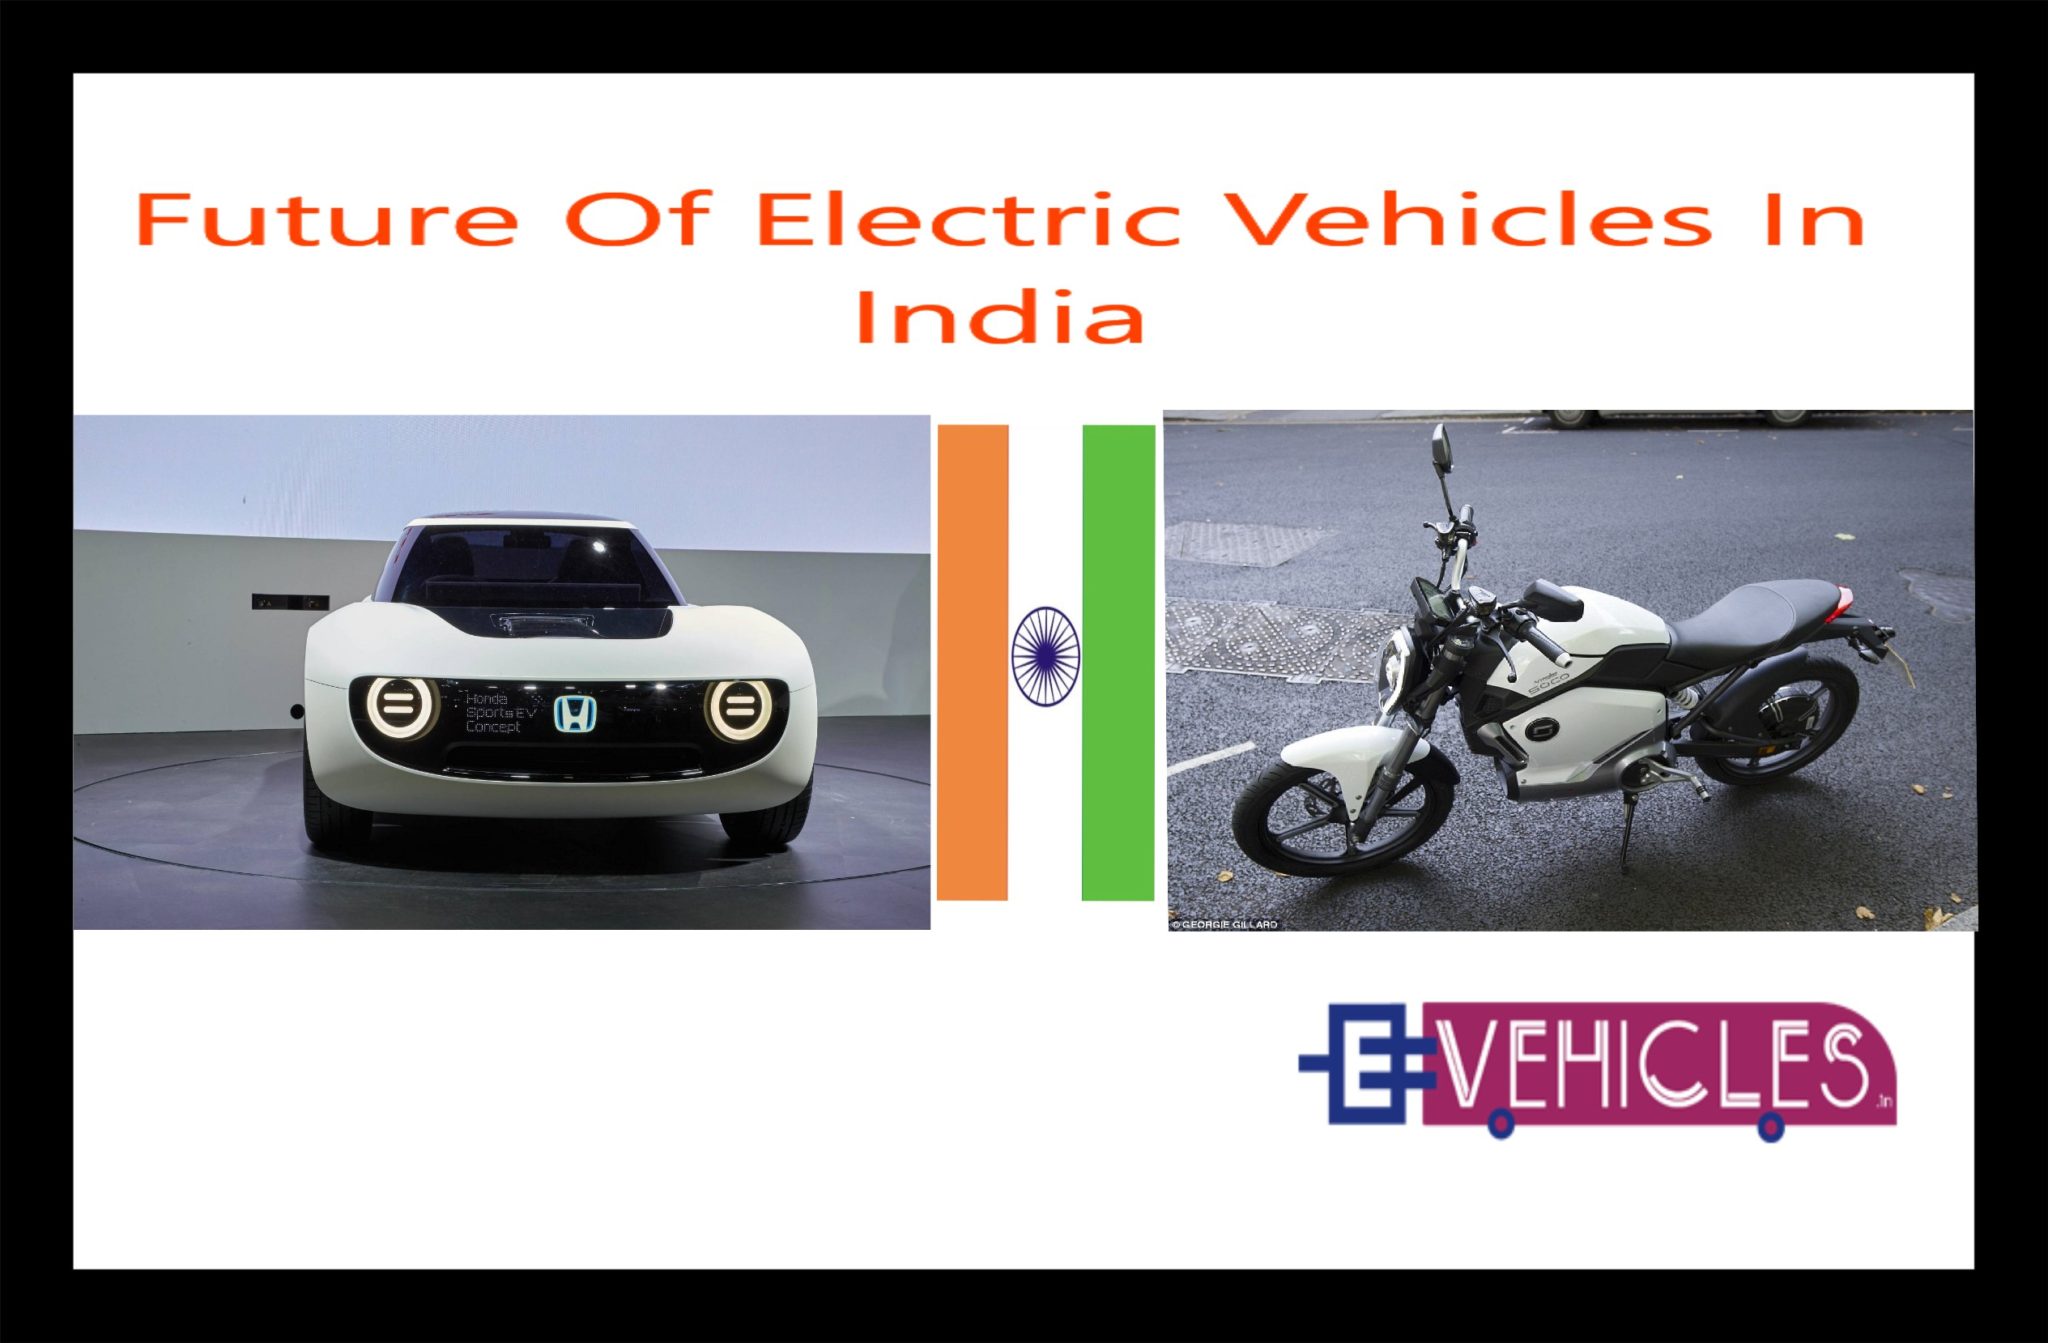 What Is The Future of Electric vehicles in India by 2030